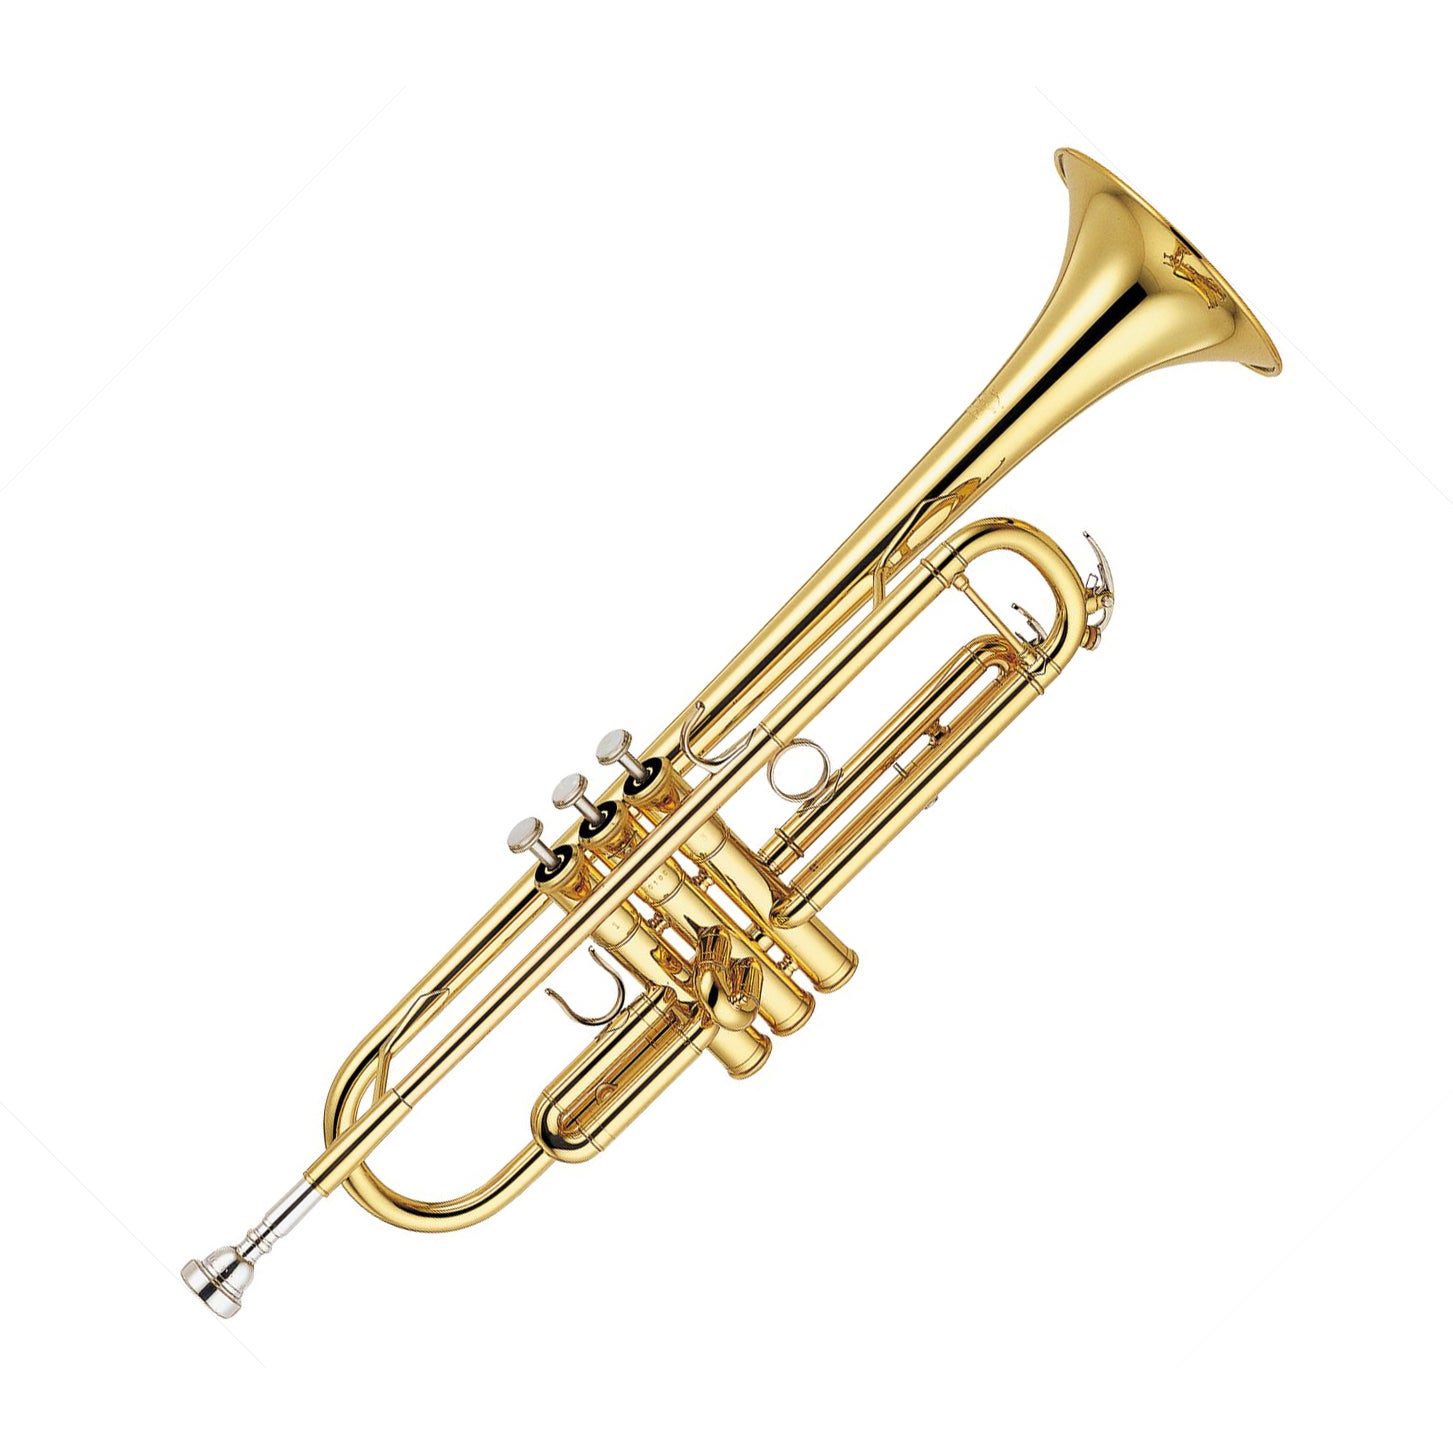 Yamaha Ytr6345-g Trumpet, Gold Brass Bell, Gold Lacquer, Pro